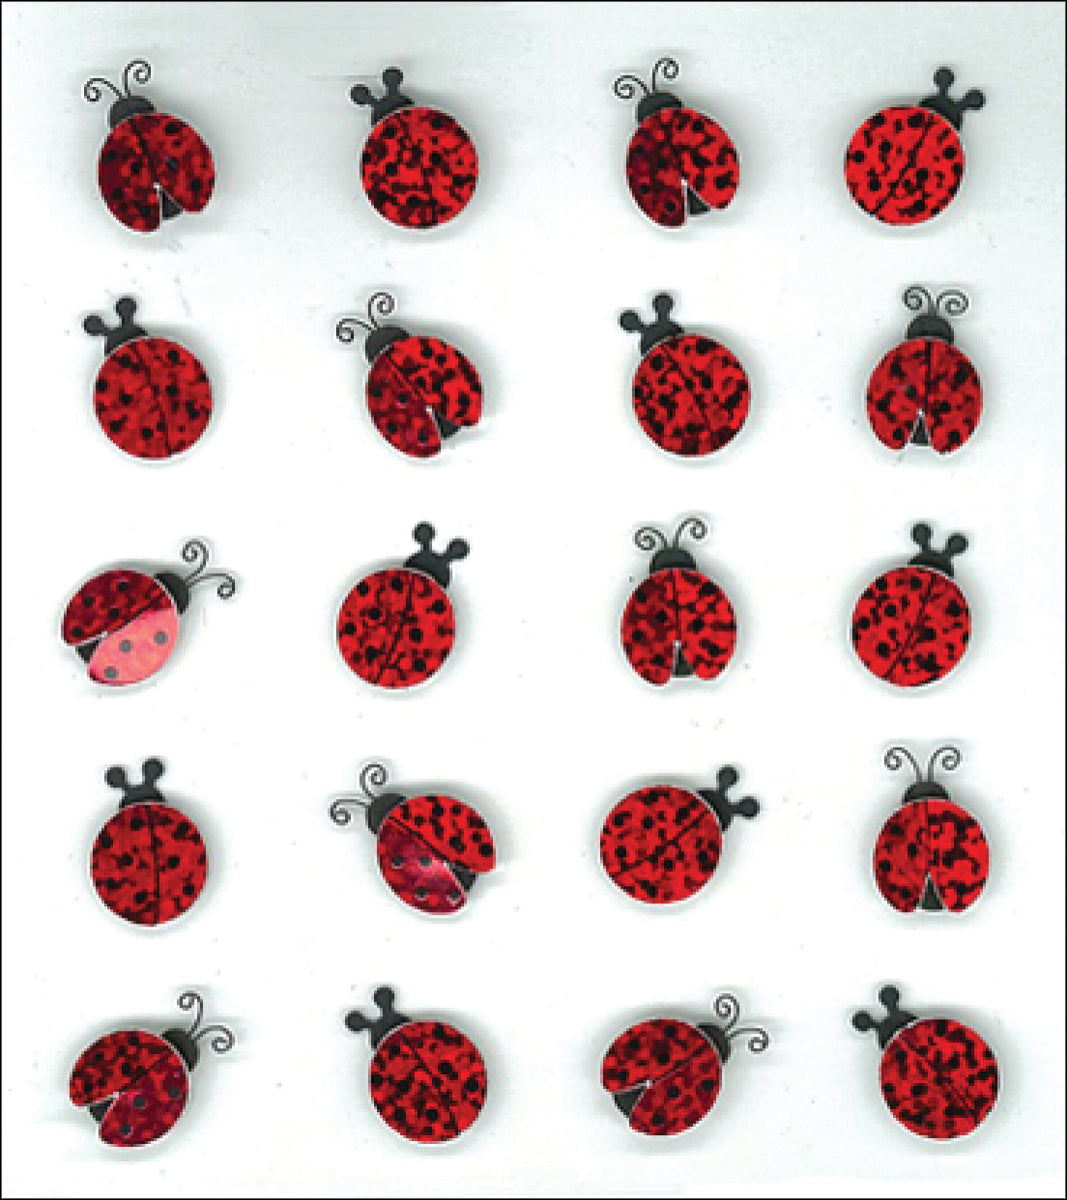 Jolee's Boutique Lady bugs Repeats Dimensional Stickers